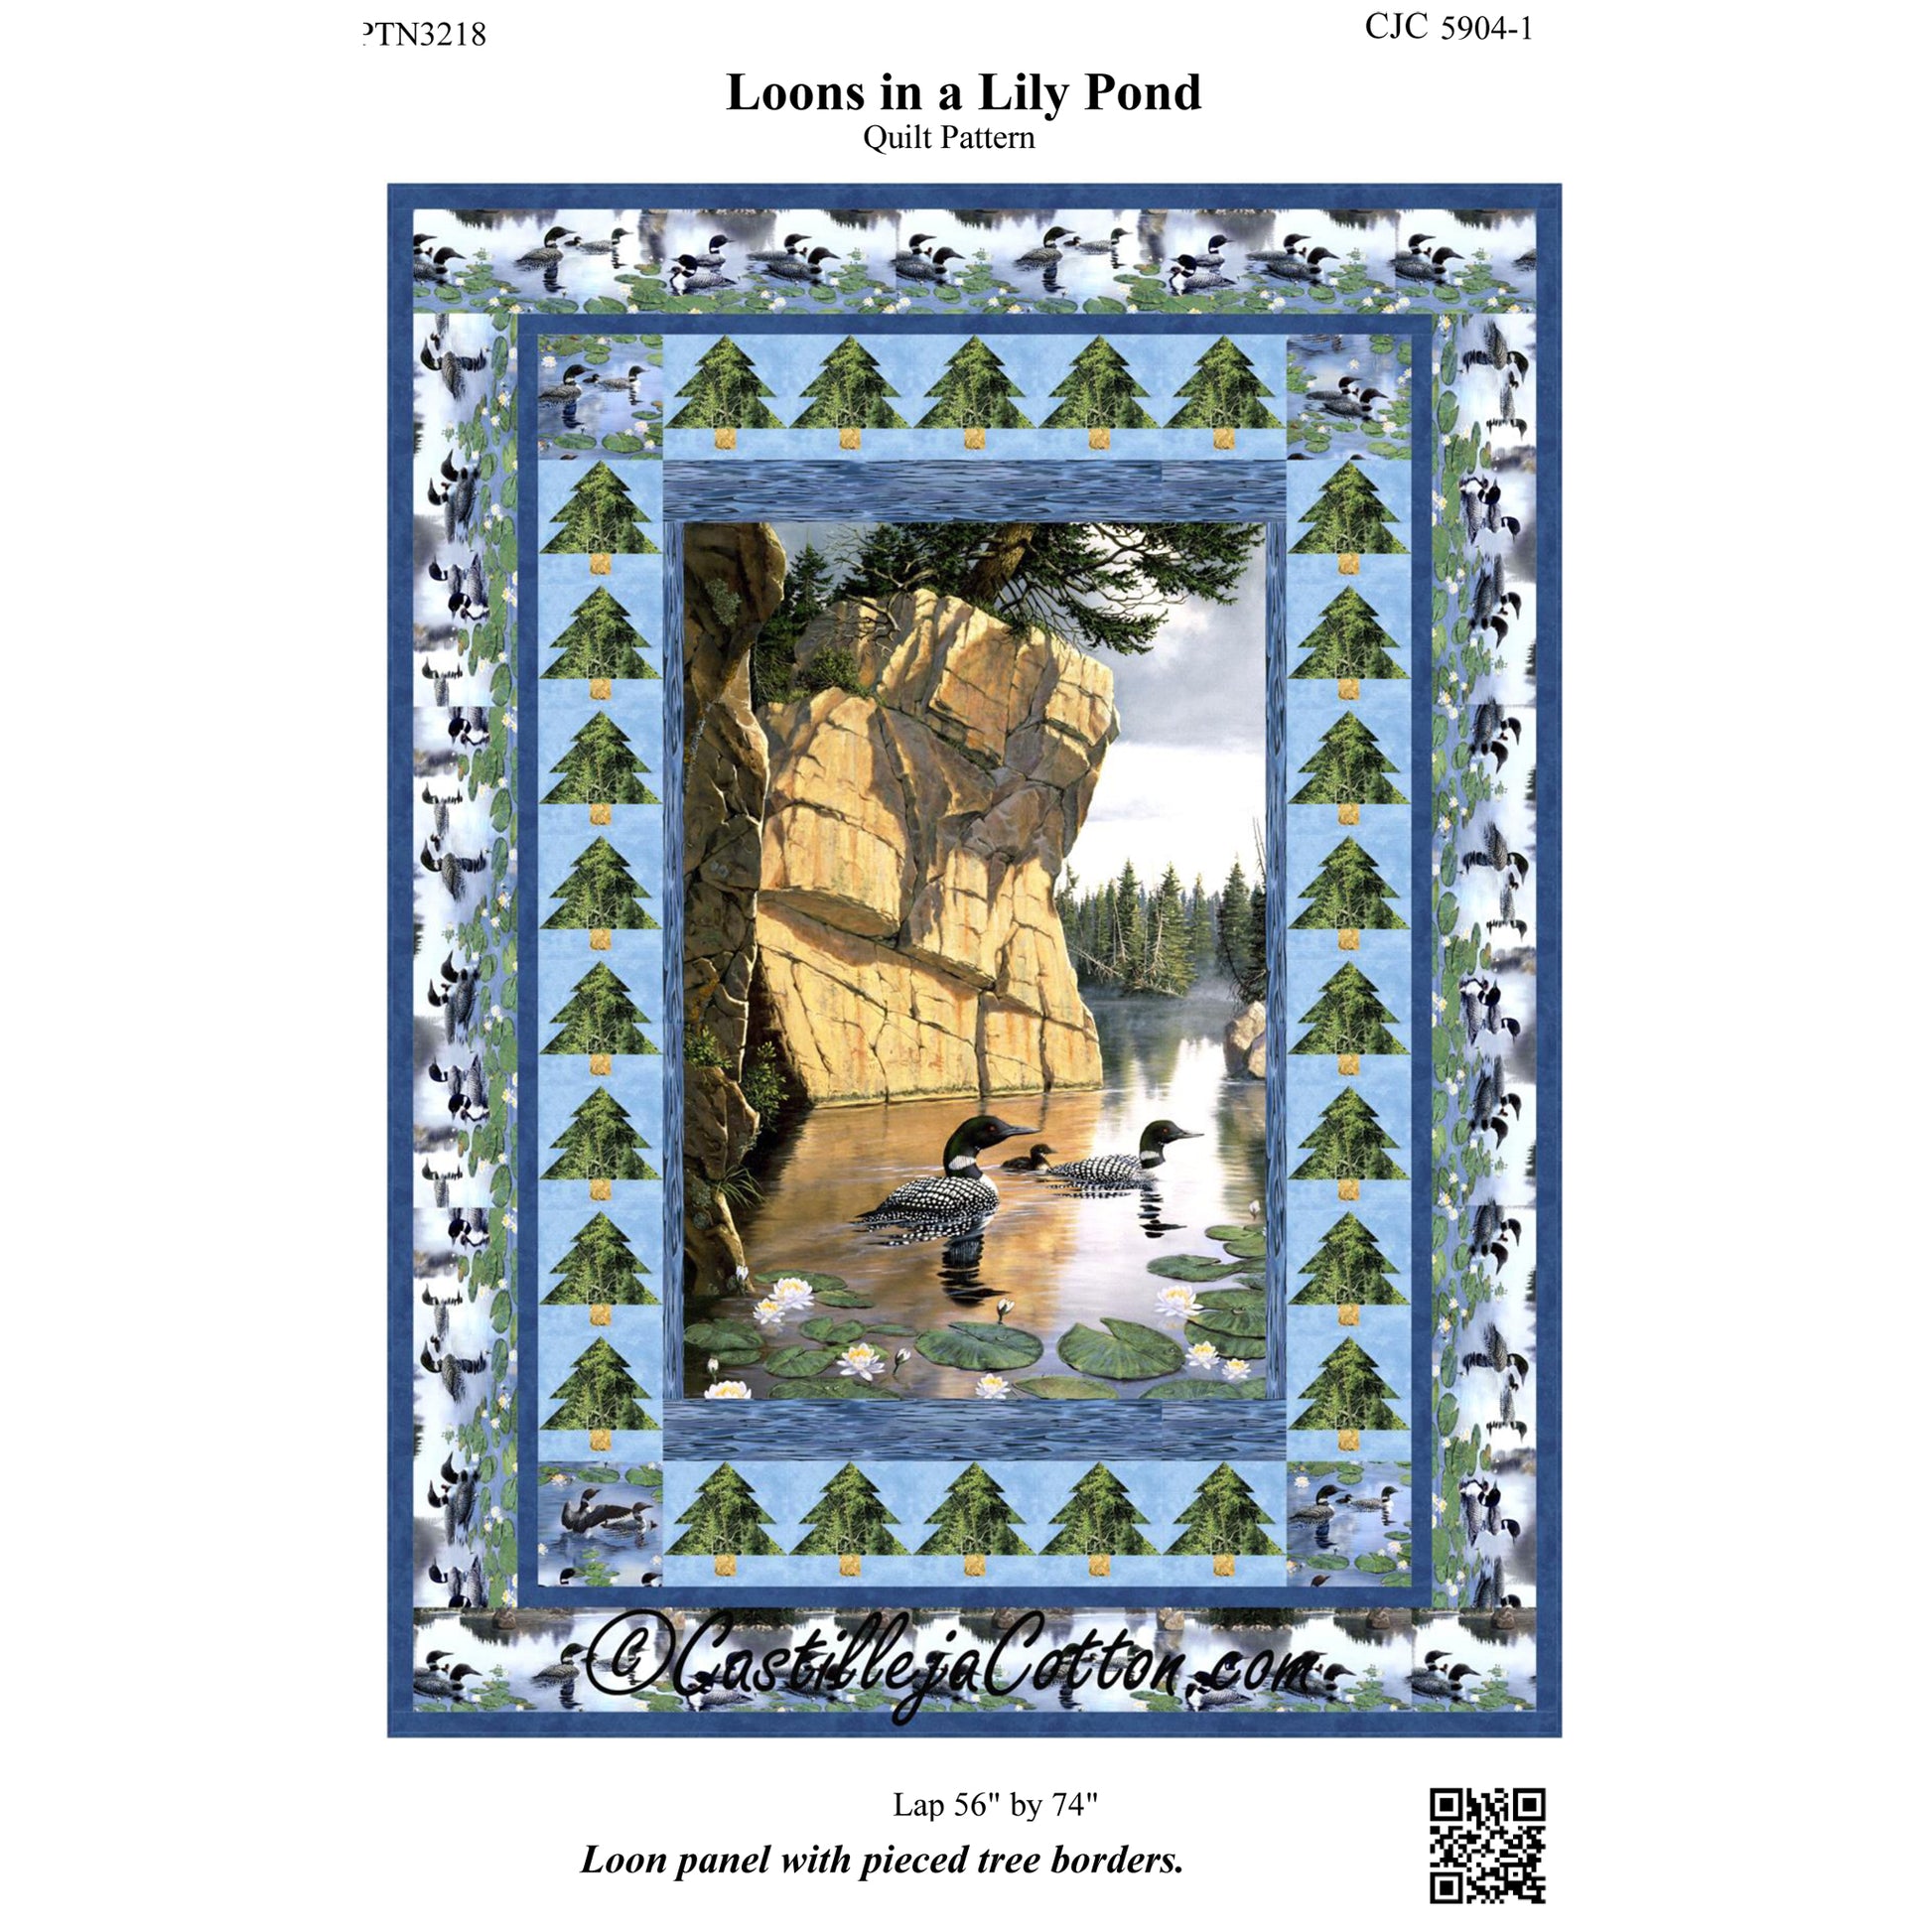 Cover image of pattern for Loons in a Lily Pond Quilt.